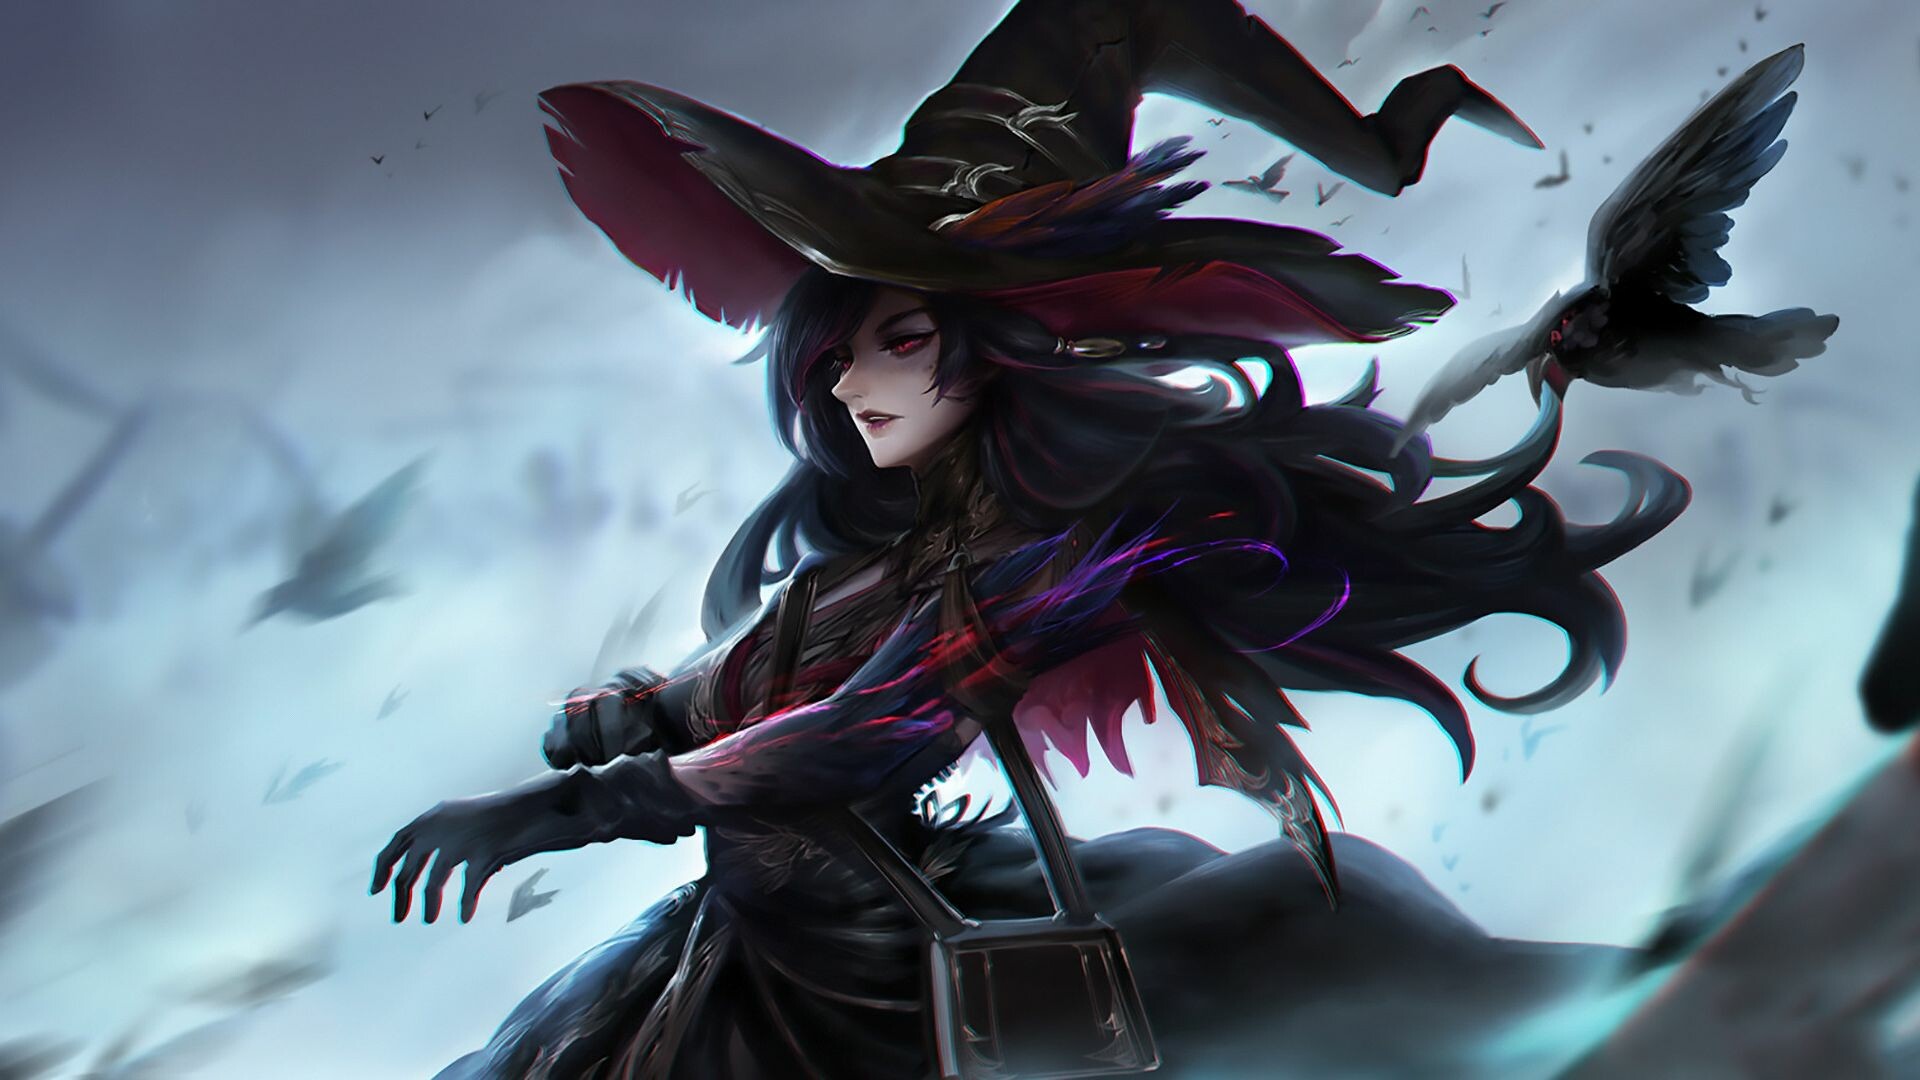 Witch: A sorceress, Malicious magic practices. 1920x1080 Full HD Wallpaper.